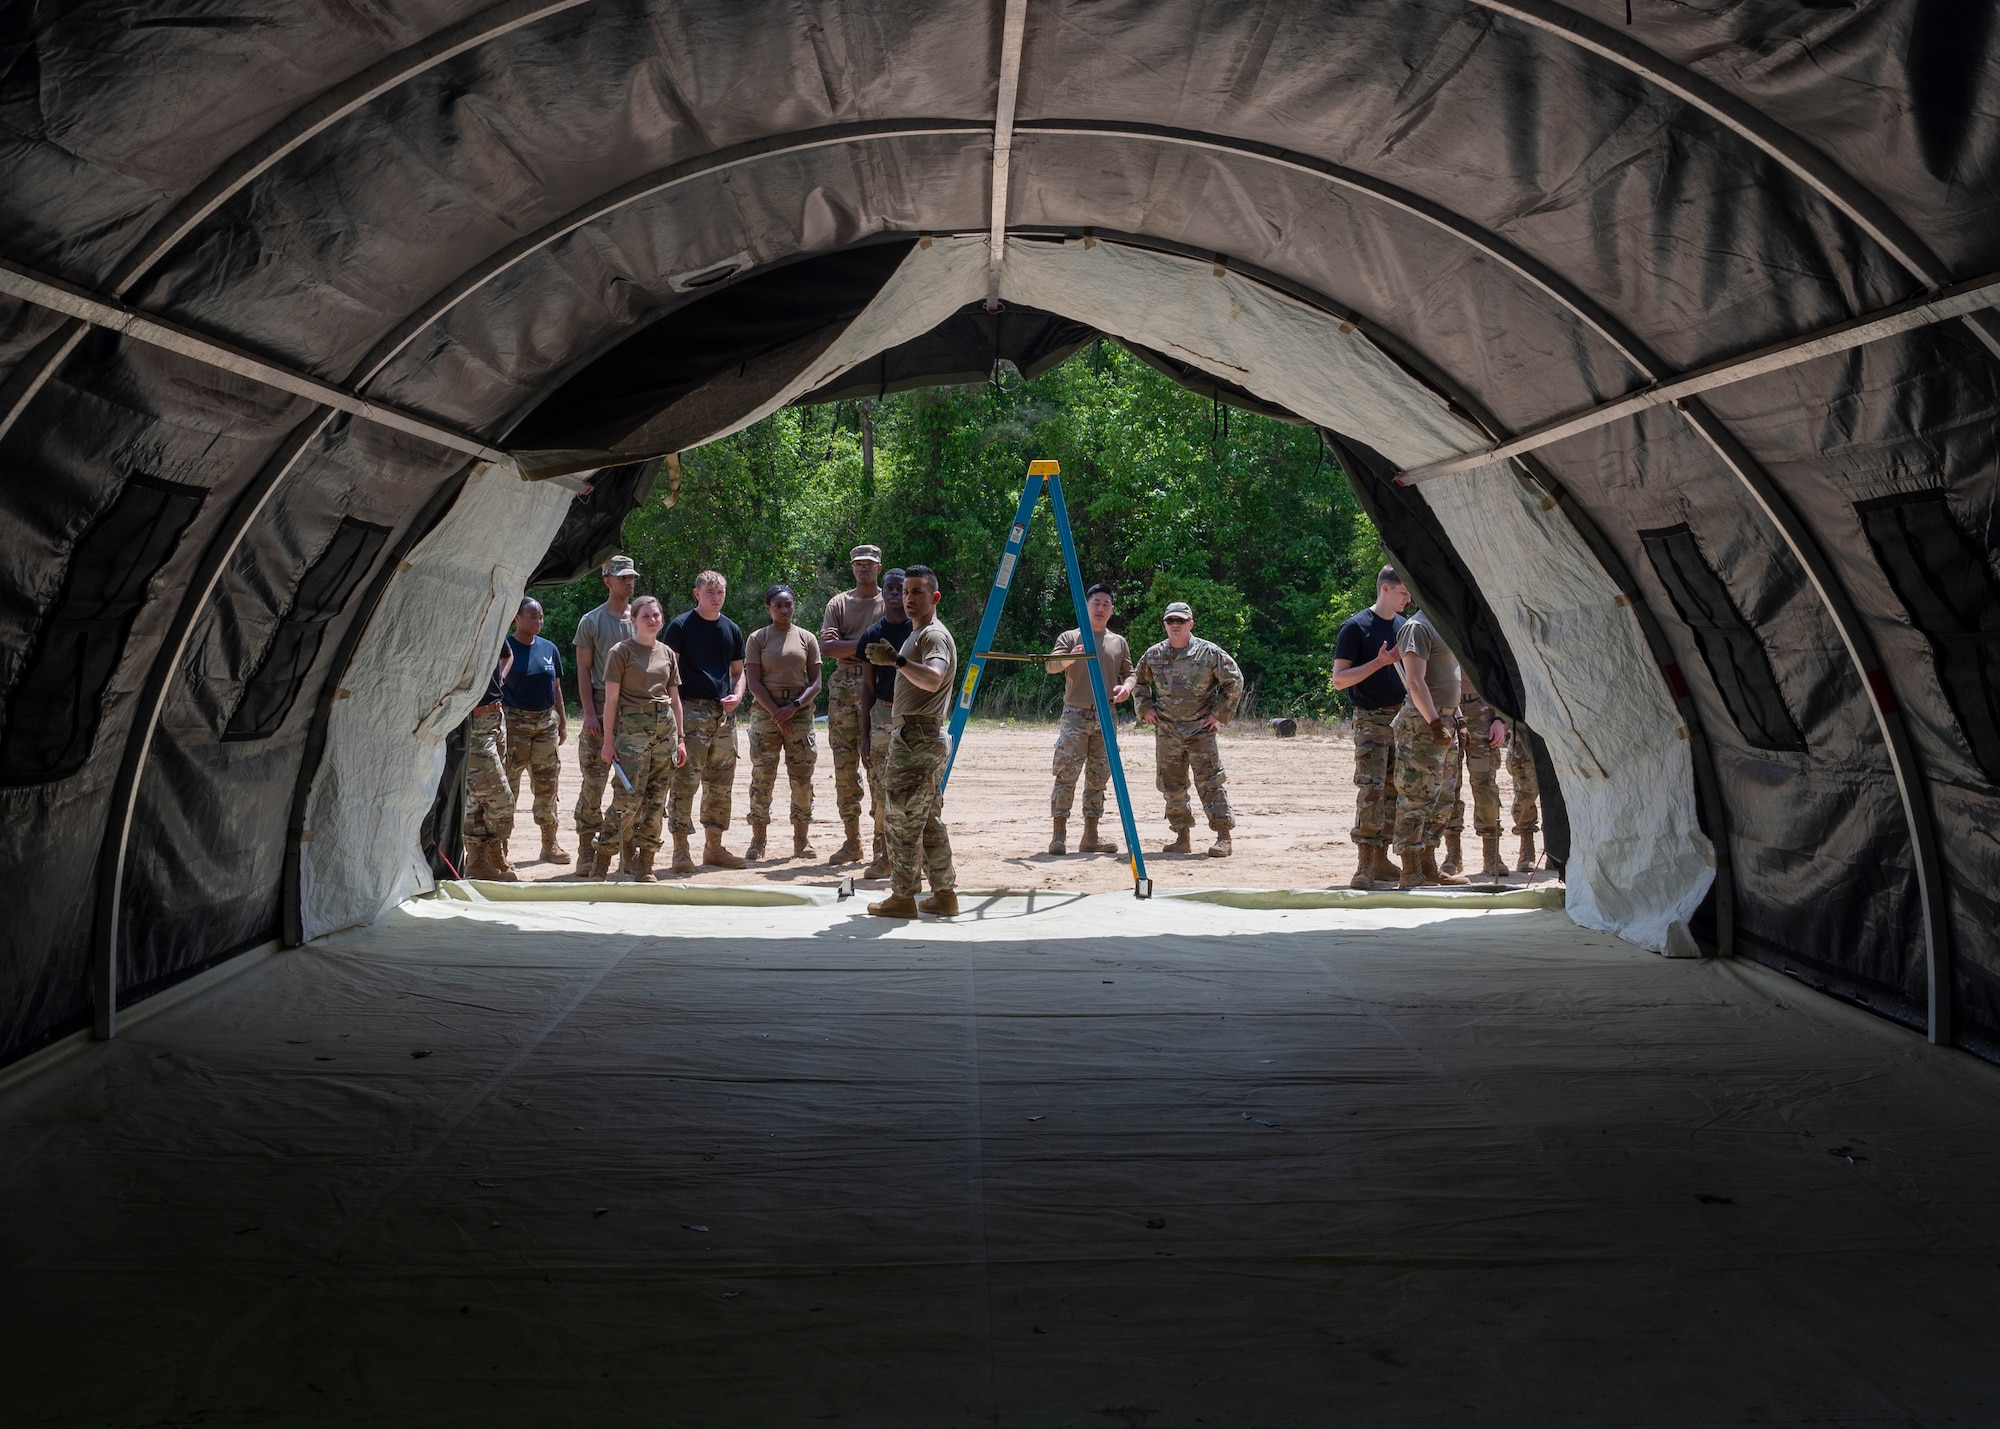 Air Force ROTC cadets from North Carolina Agricultural and Technical State University Det. 605, assemble a small shelter system during field day training at Seymour Johnson Air Force Base, North Carolina, April 21, 2022.